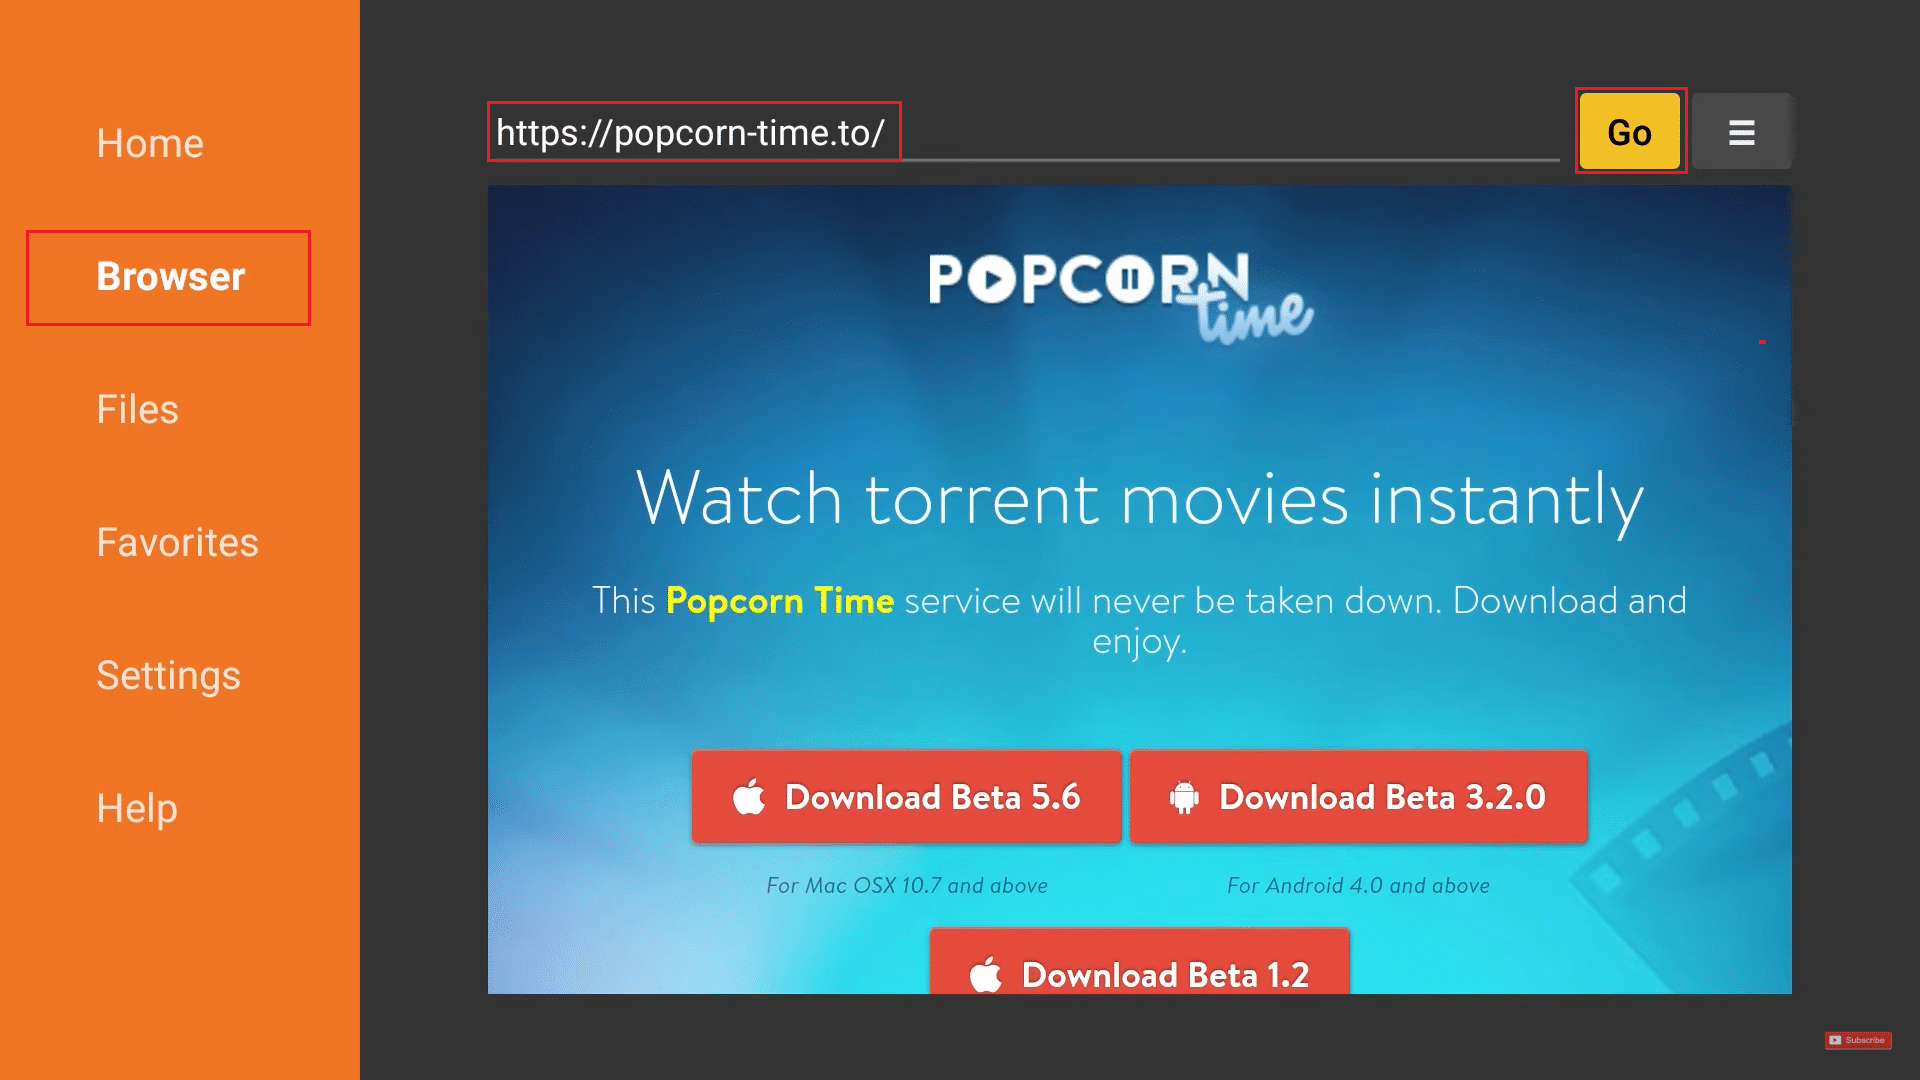 go to browser menu and go to the popcorn time website in Downloader program Amazon fire tv